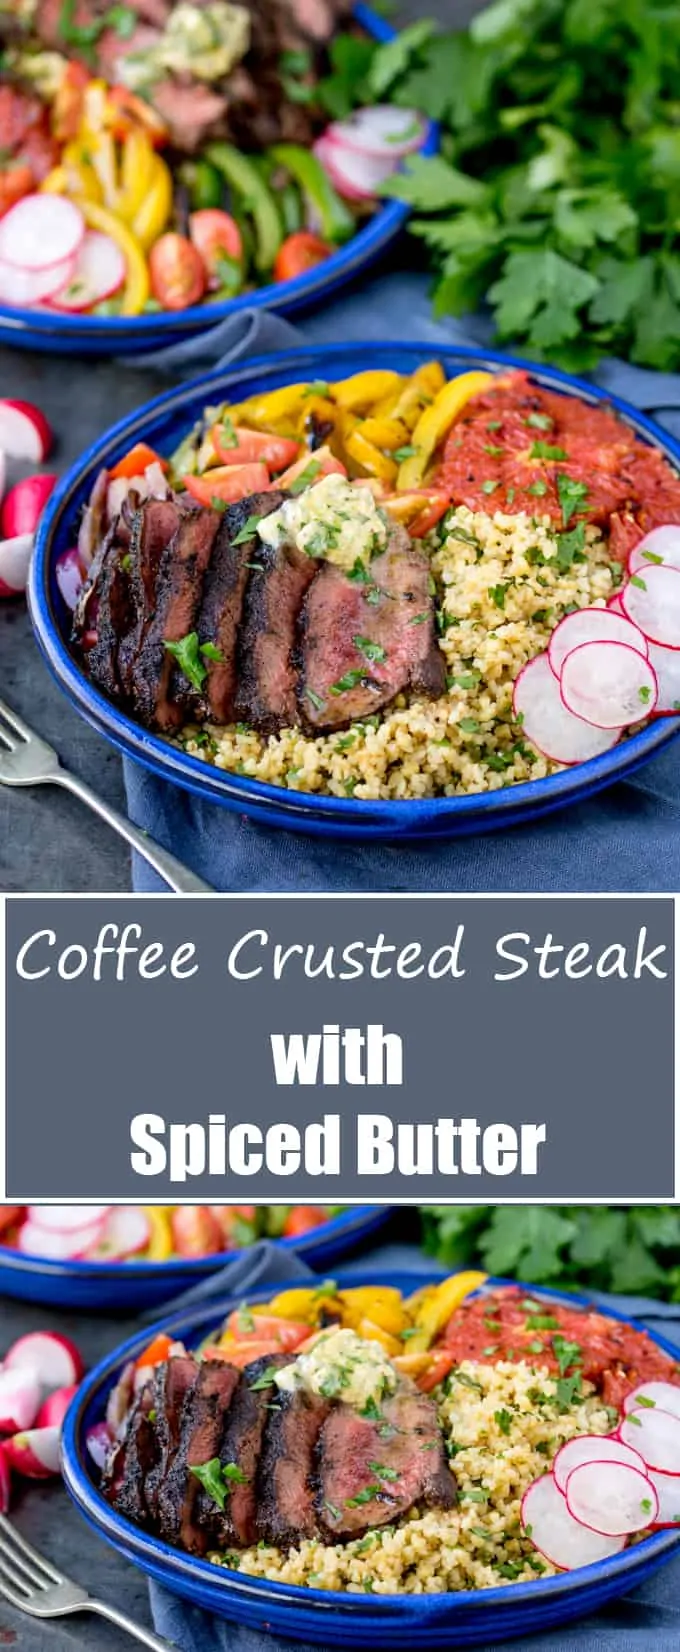 Coffee Crusted Steak Buddha Bowl with Spiced Butter. A real treat! Your questions answered - do I use fresh coffee grounds? Old grounds? Instant coffee?